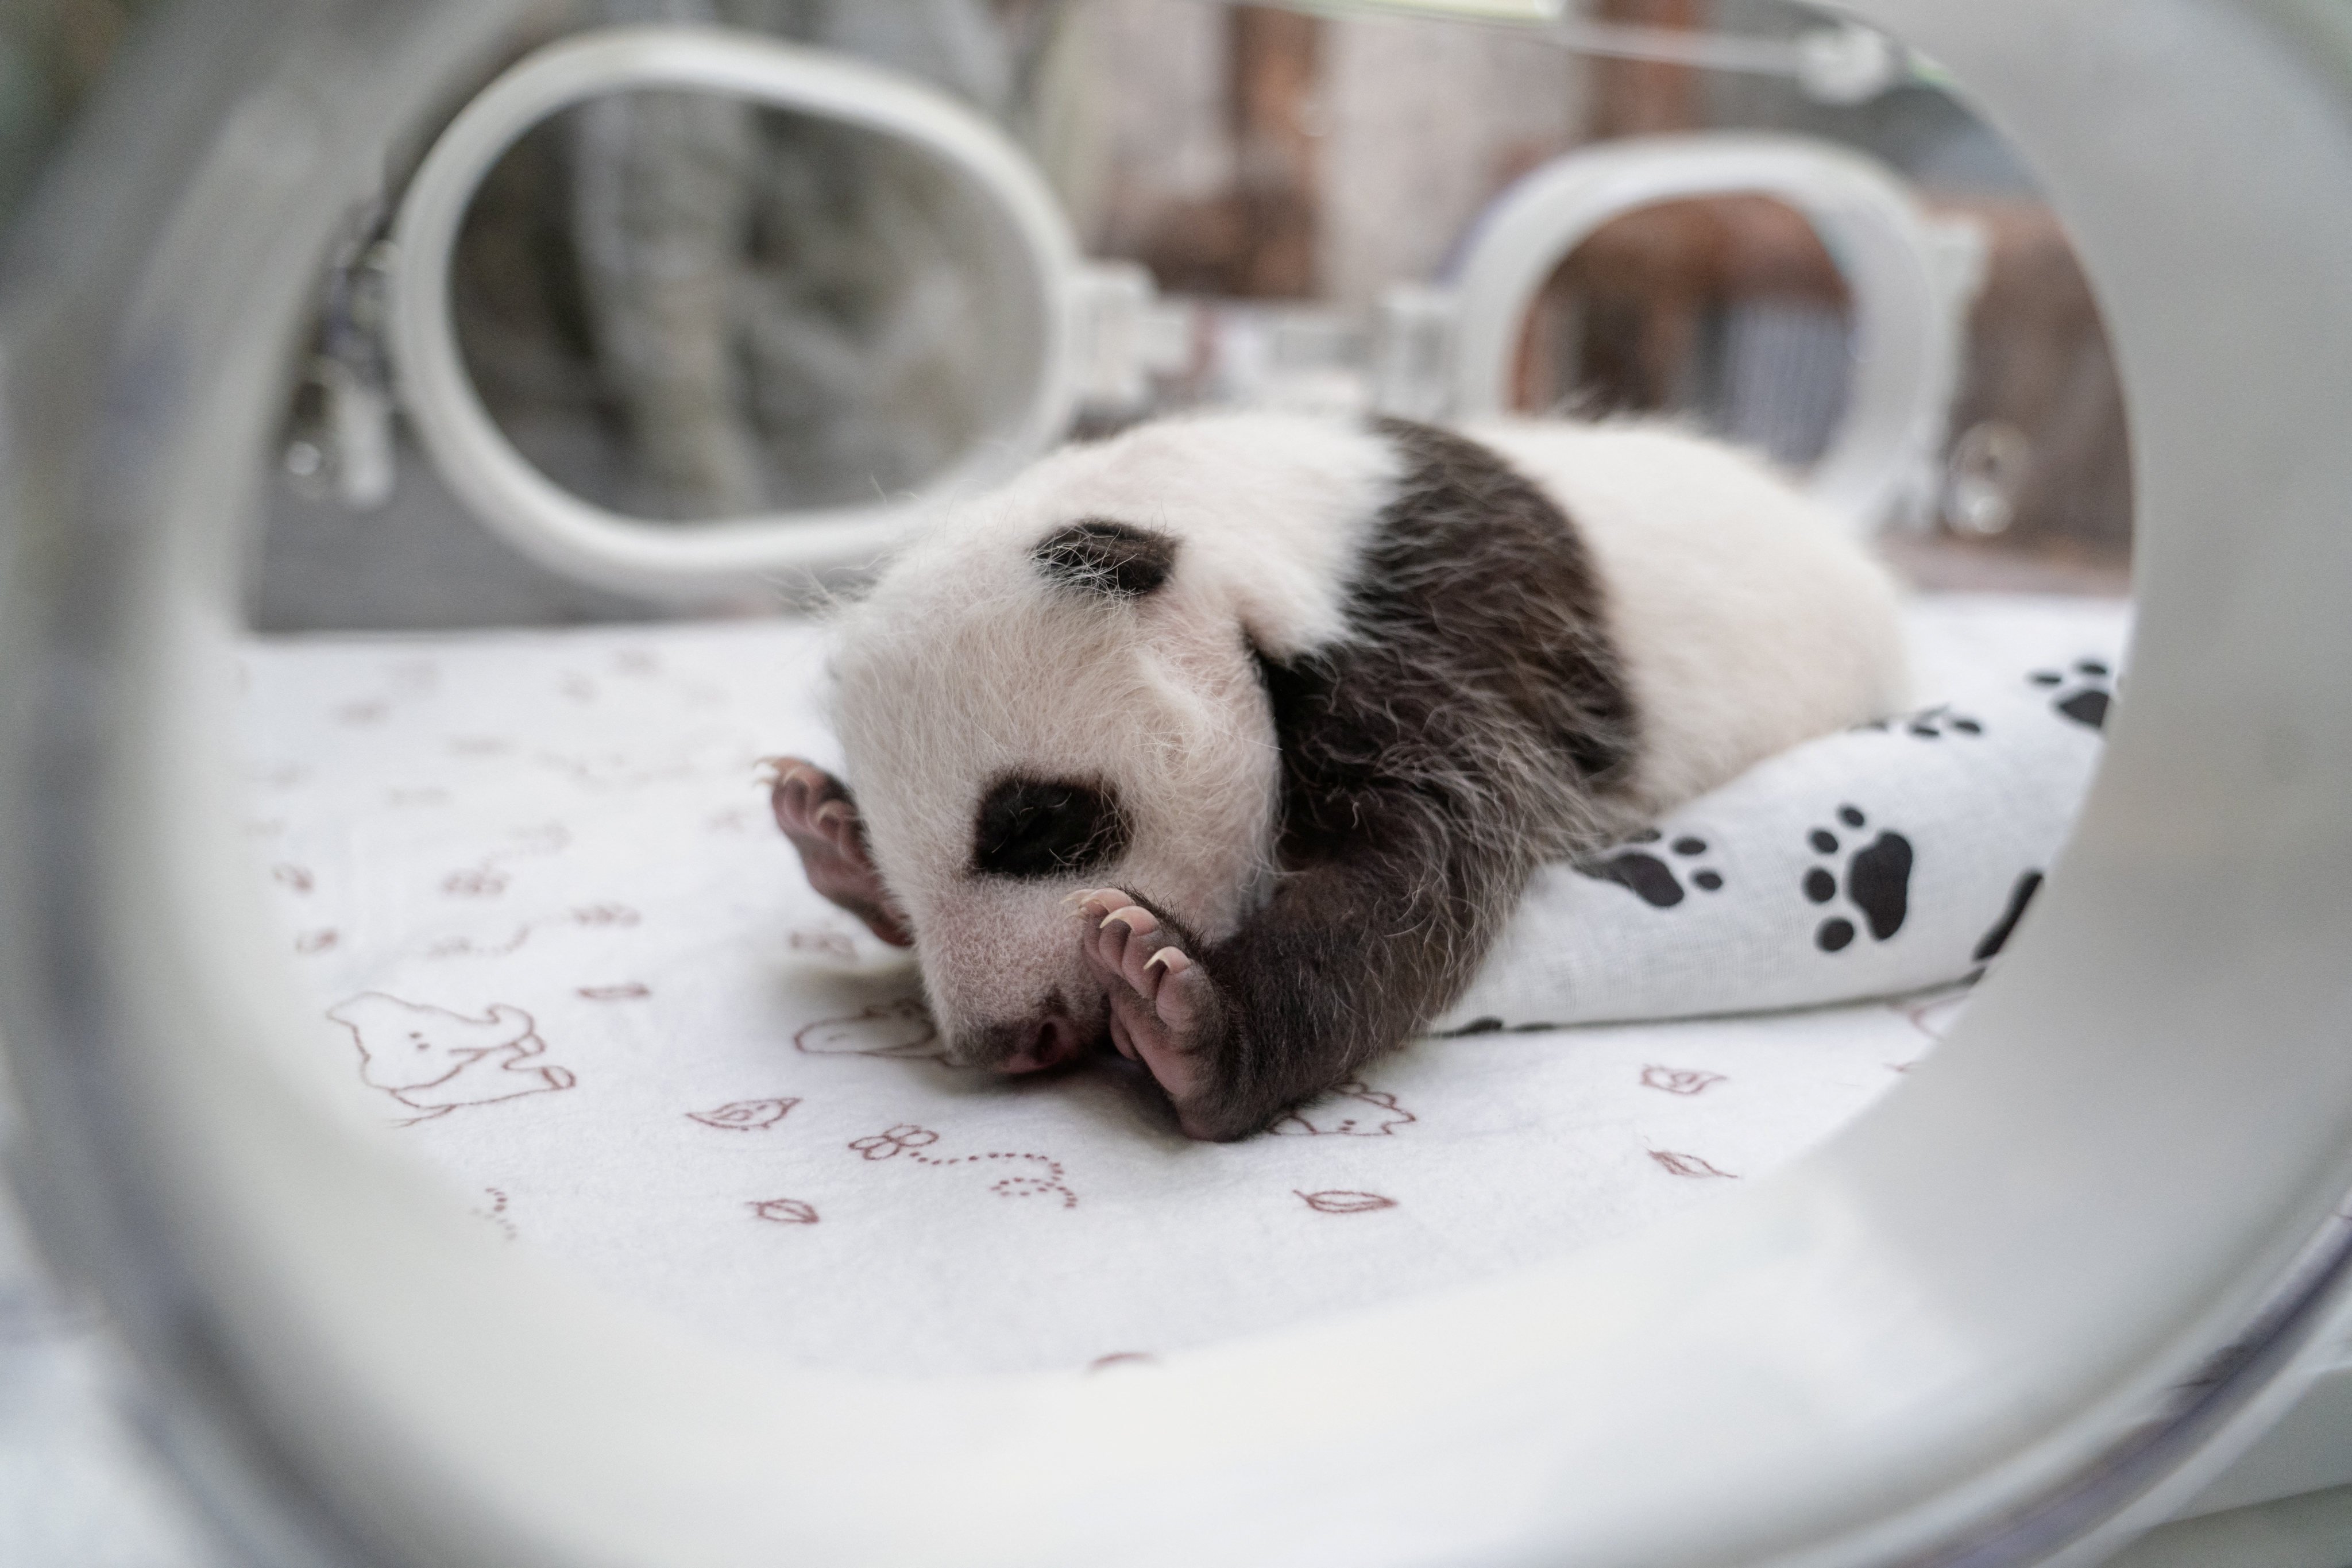 A one-month-old female giant panda cub lies in an incubator at the Moscow Zoo. Photo: Moscow Zoo via Reuters